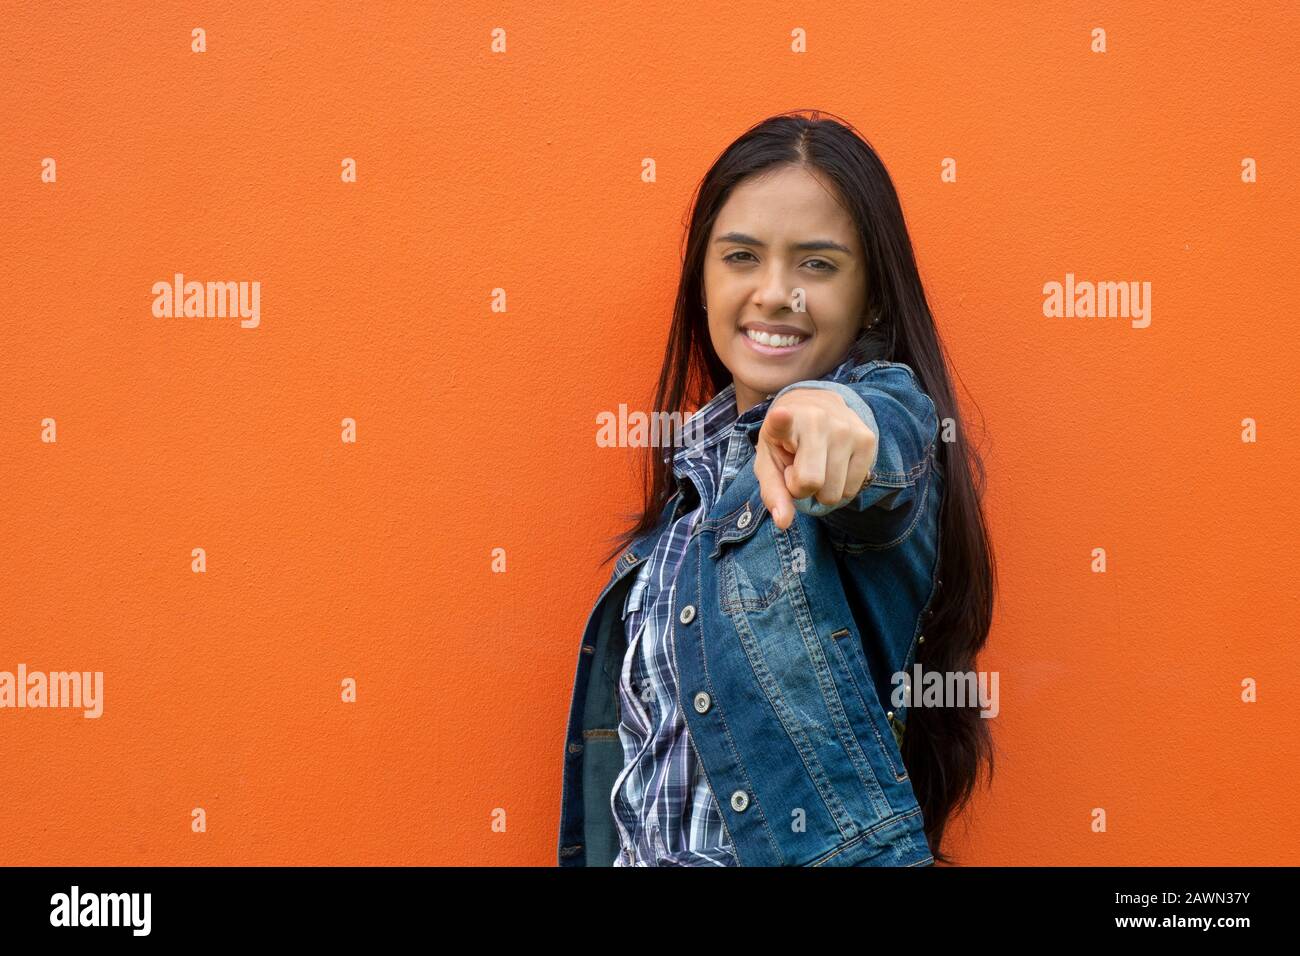 Portrait Of Smiling Young Woman  While Standing Against Orange Wall, Panama, Central America Stock Photo